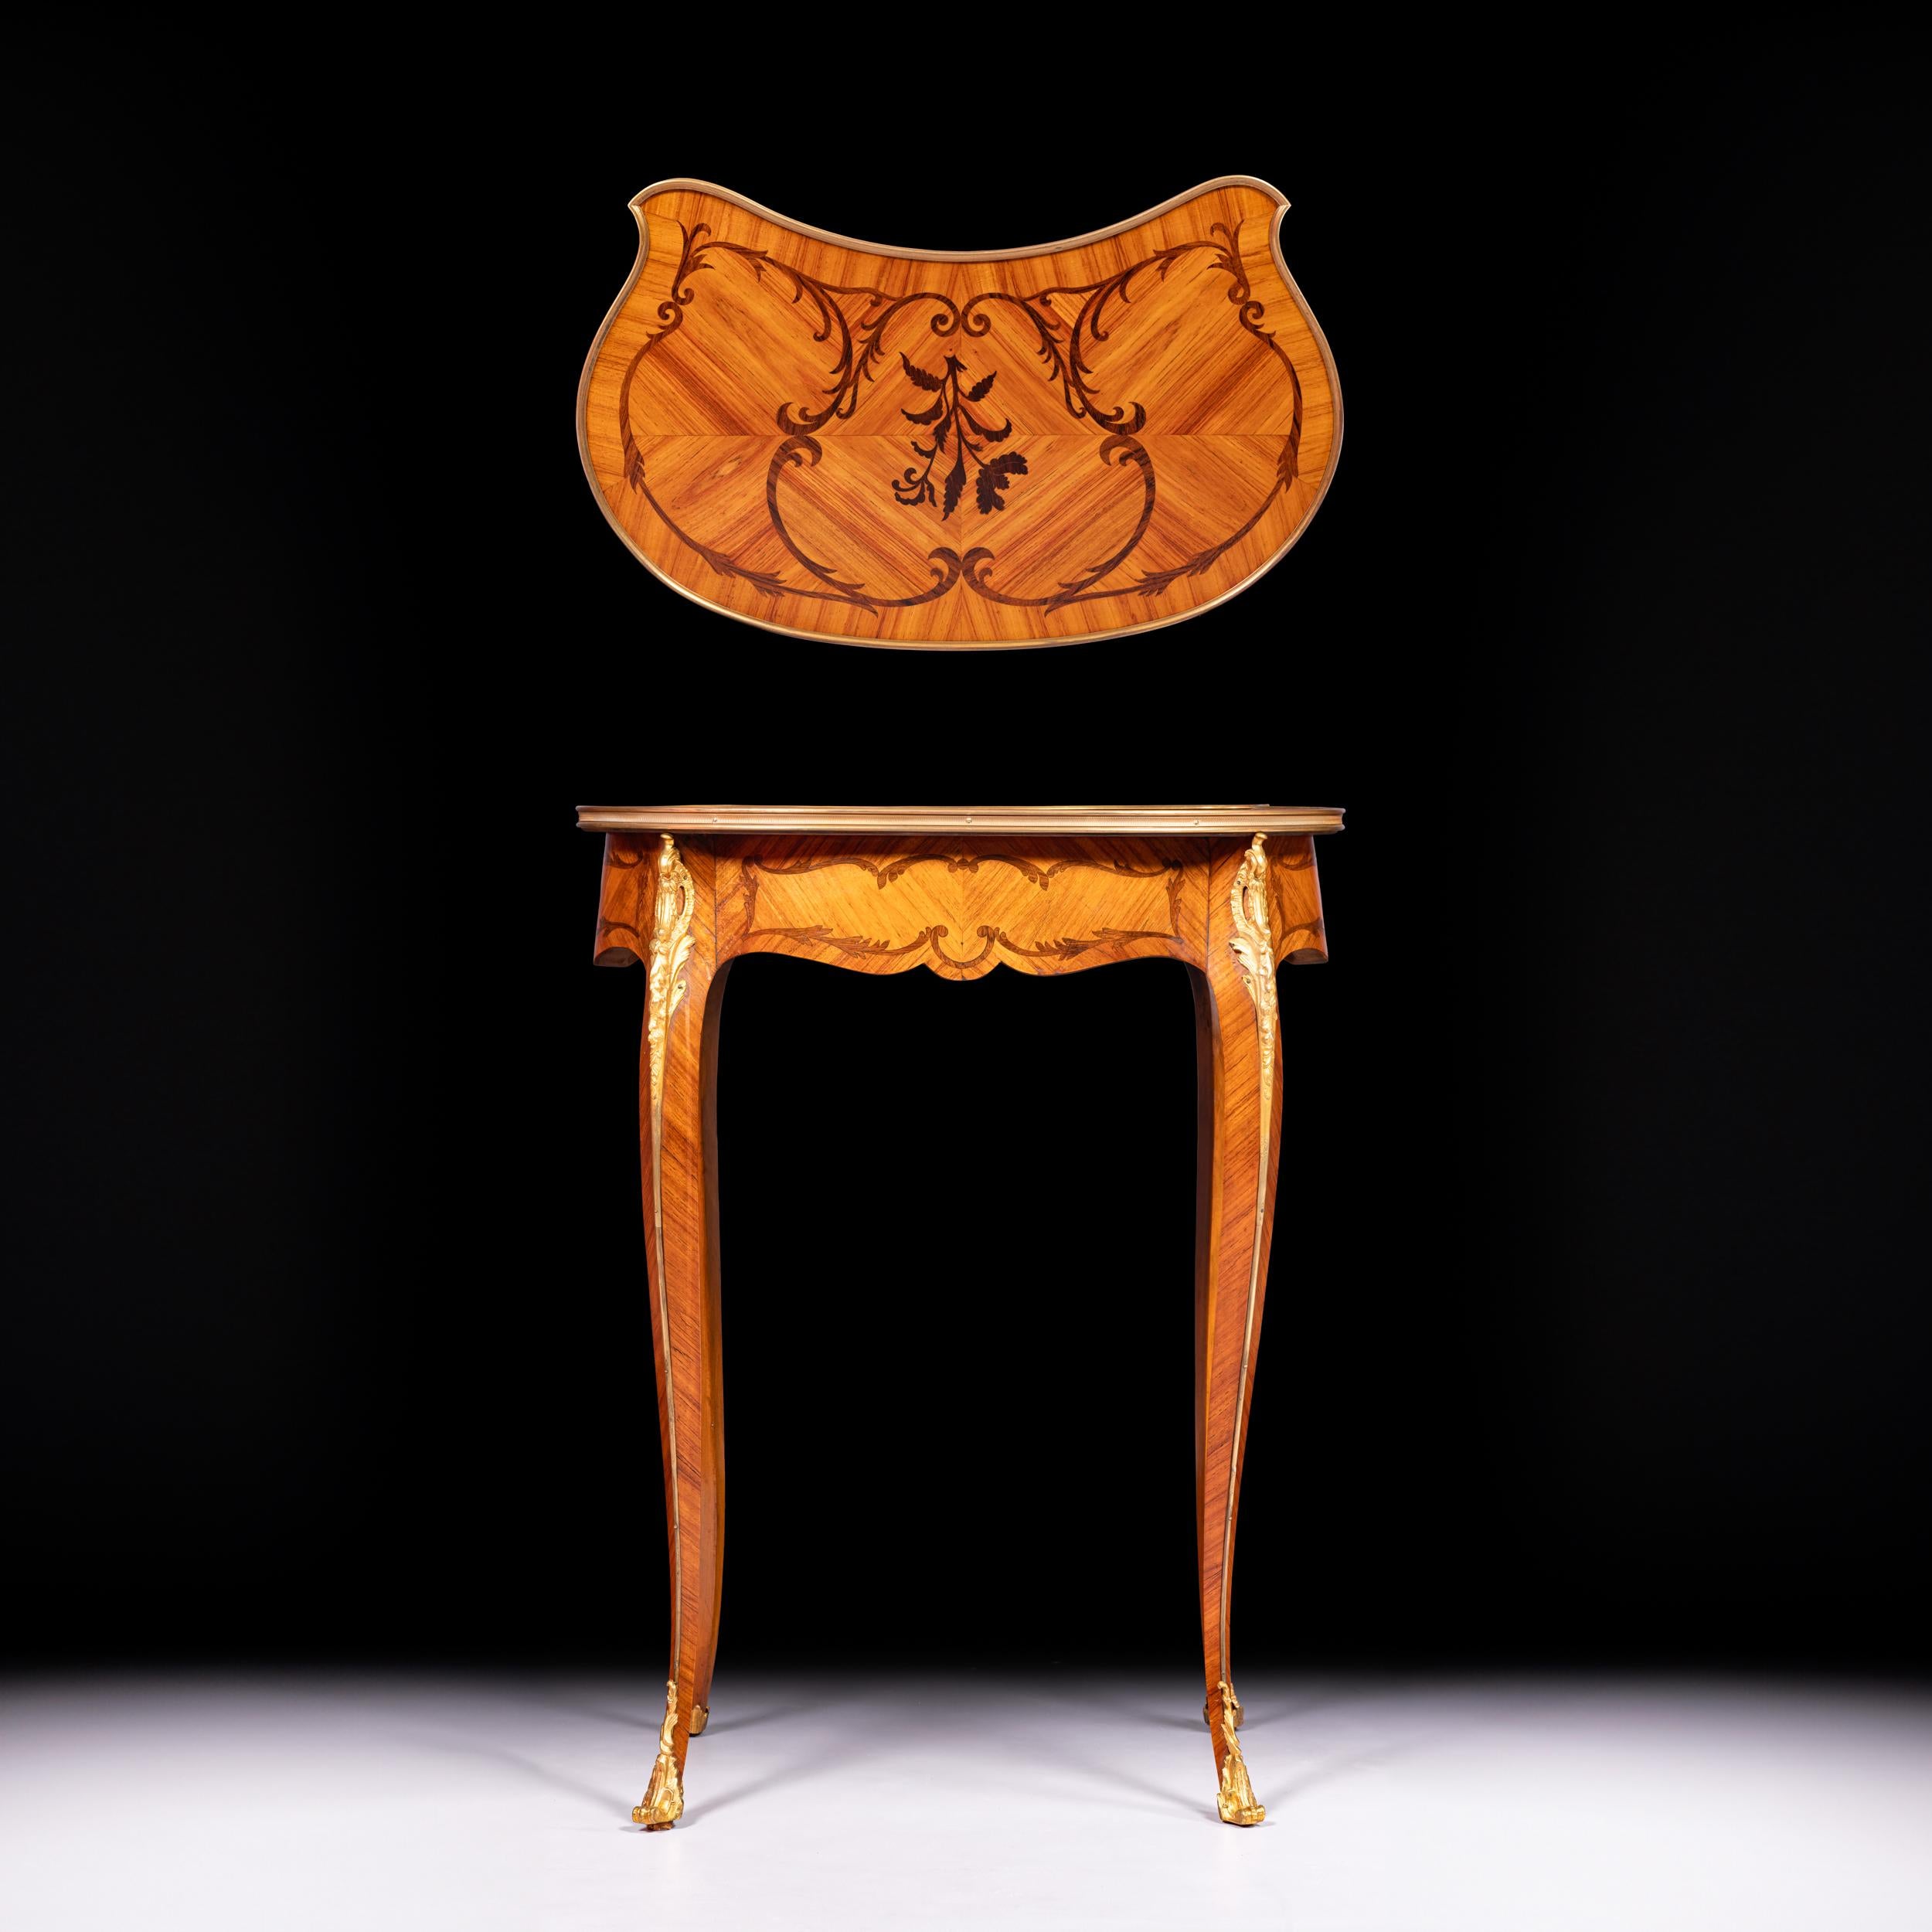 A very fine and elegant kidney shaped side / occasional table, raised by four delicately scrolled cabriole legs the kidney-shaped table is fitted with a small central drawer. The table top is decorated with a pattern marquetry, while the sides also